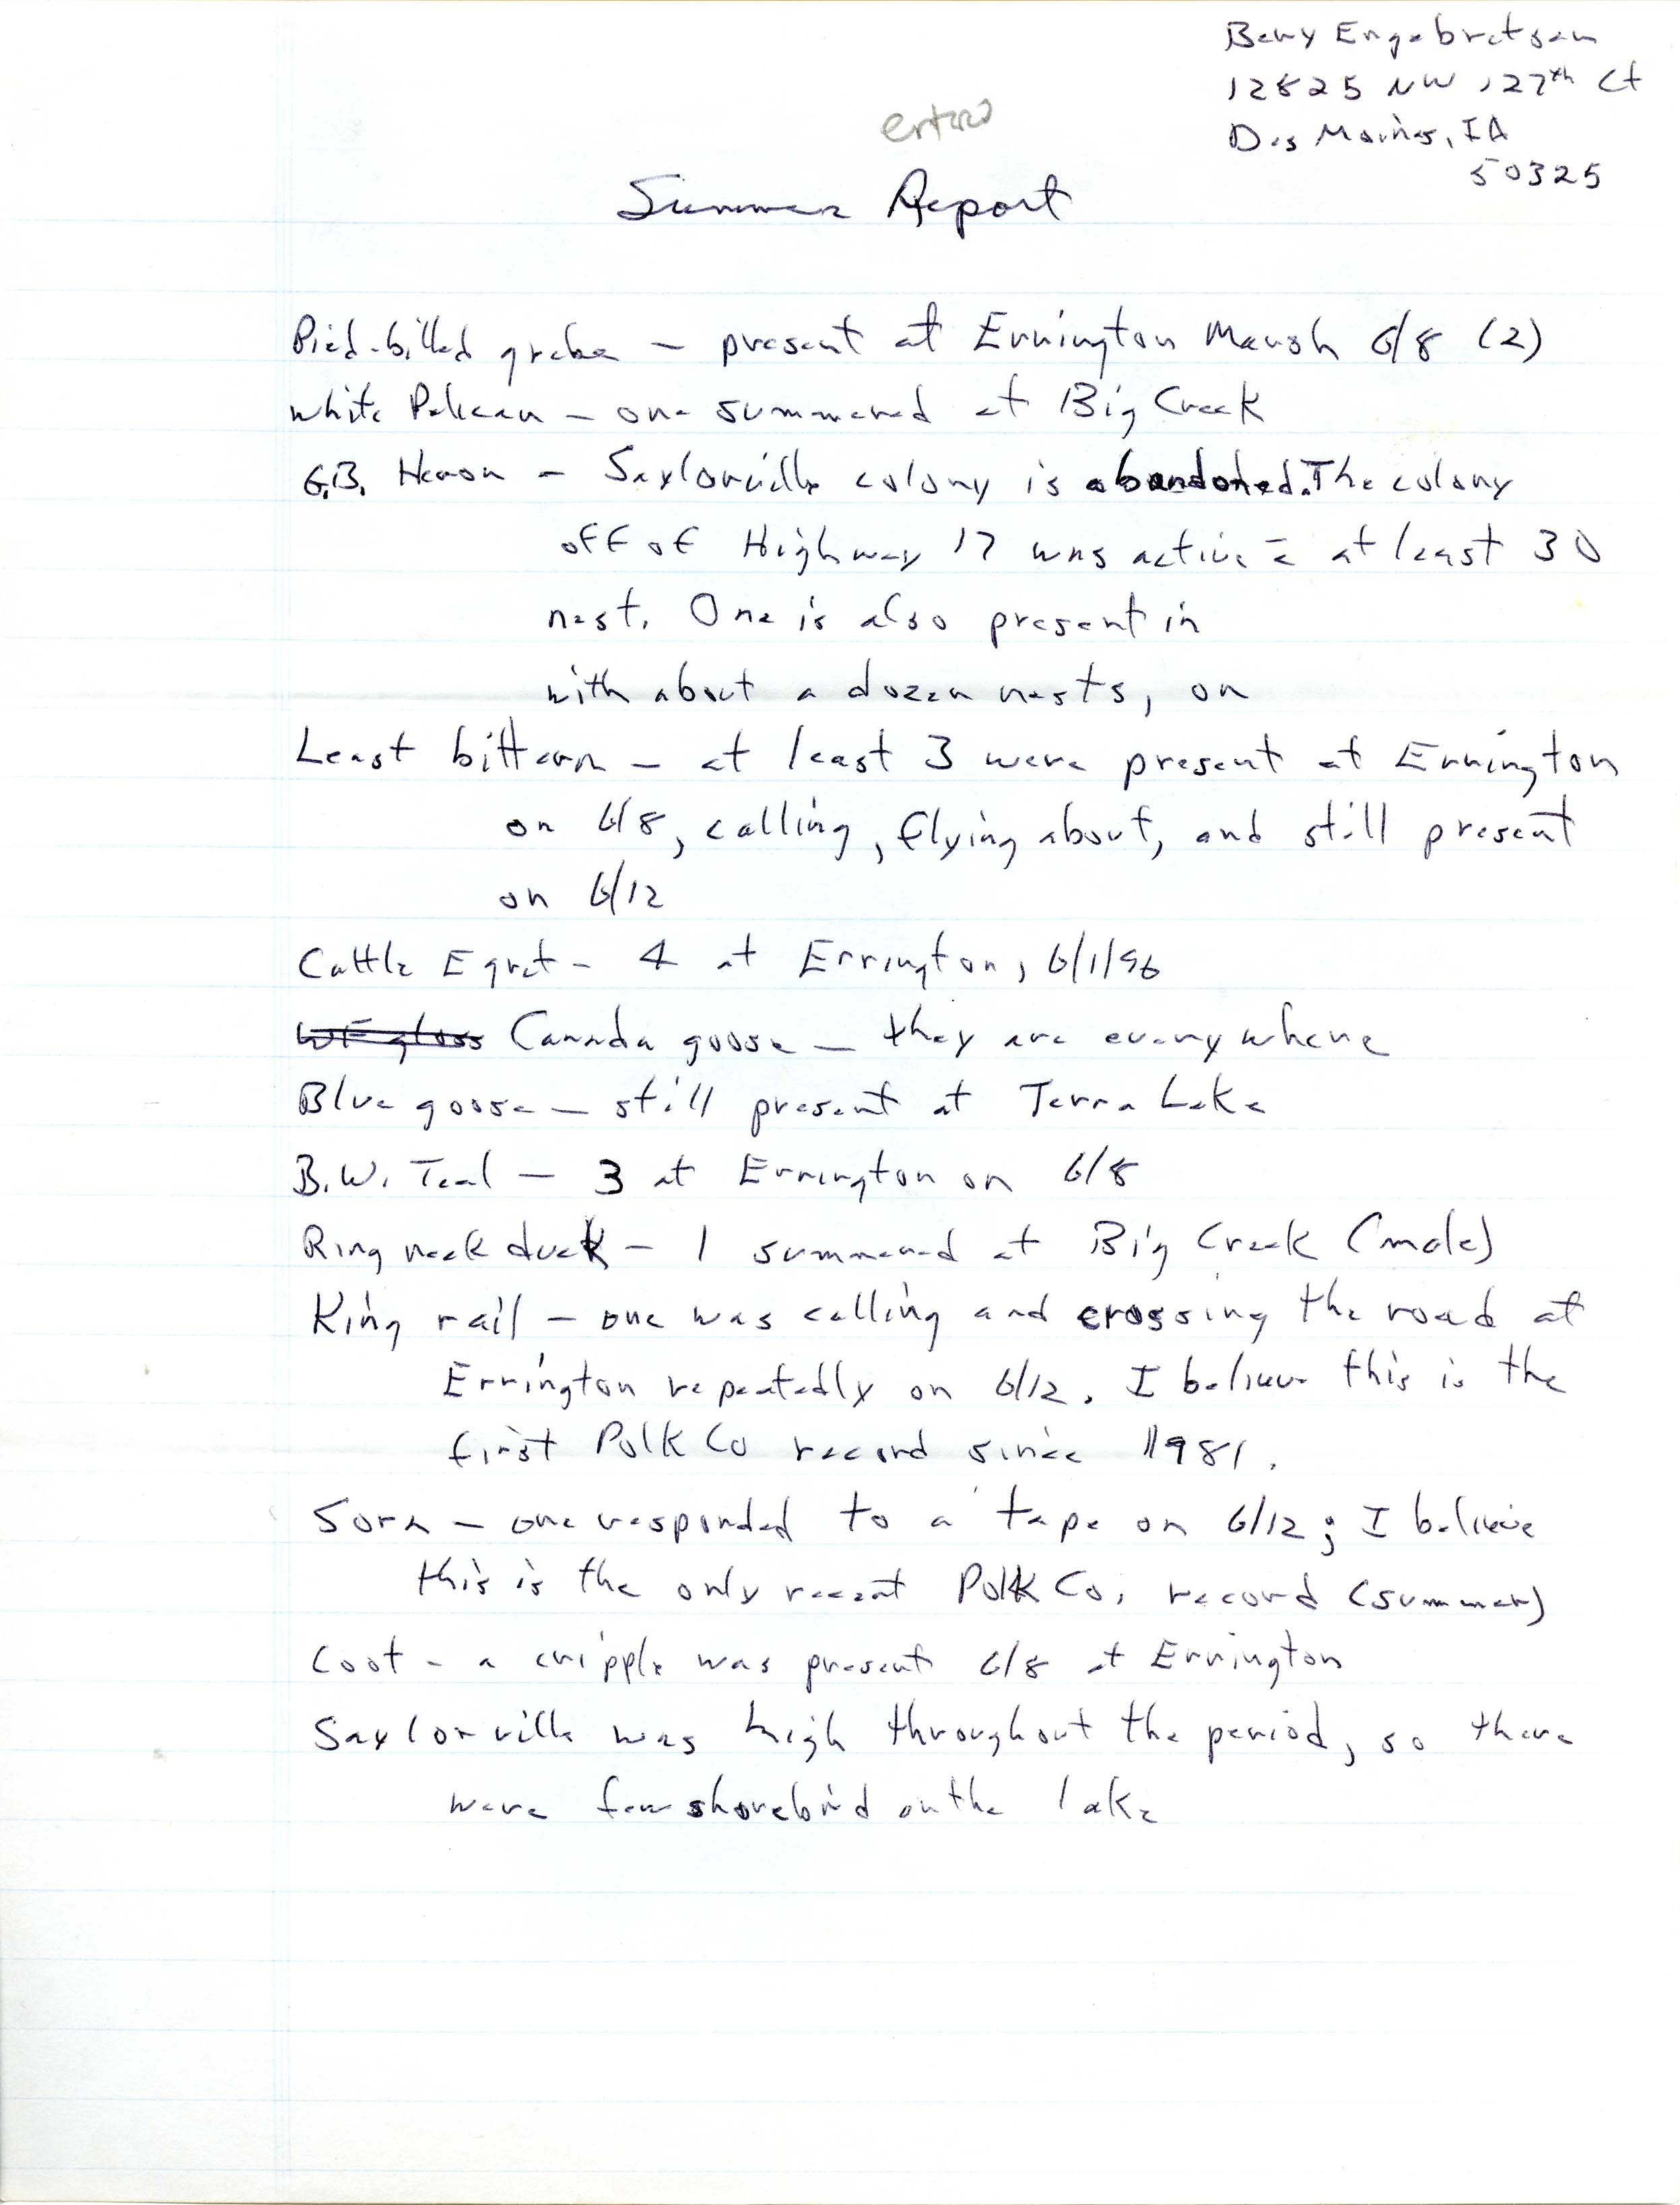 Field notes contributed by Bery Engebretsen, summer 1996